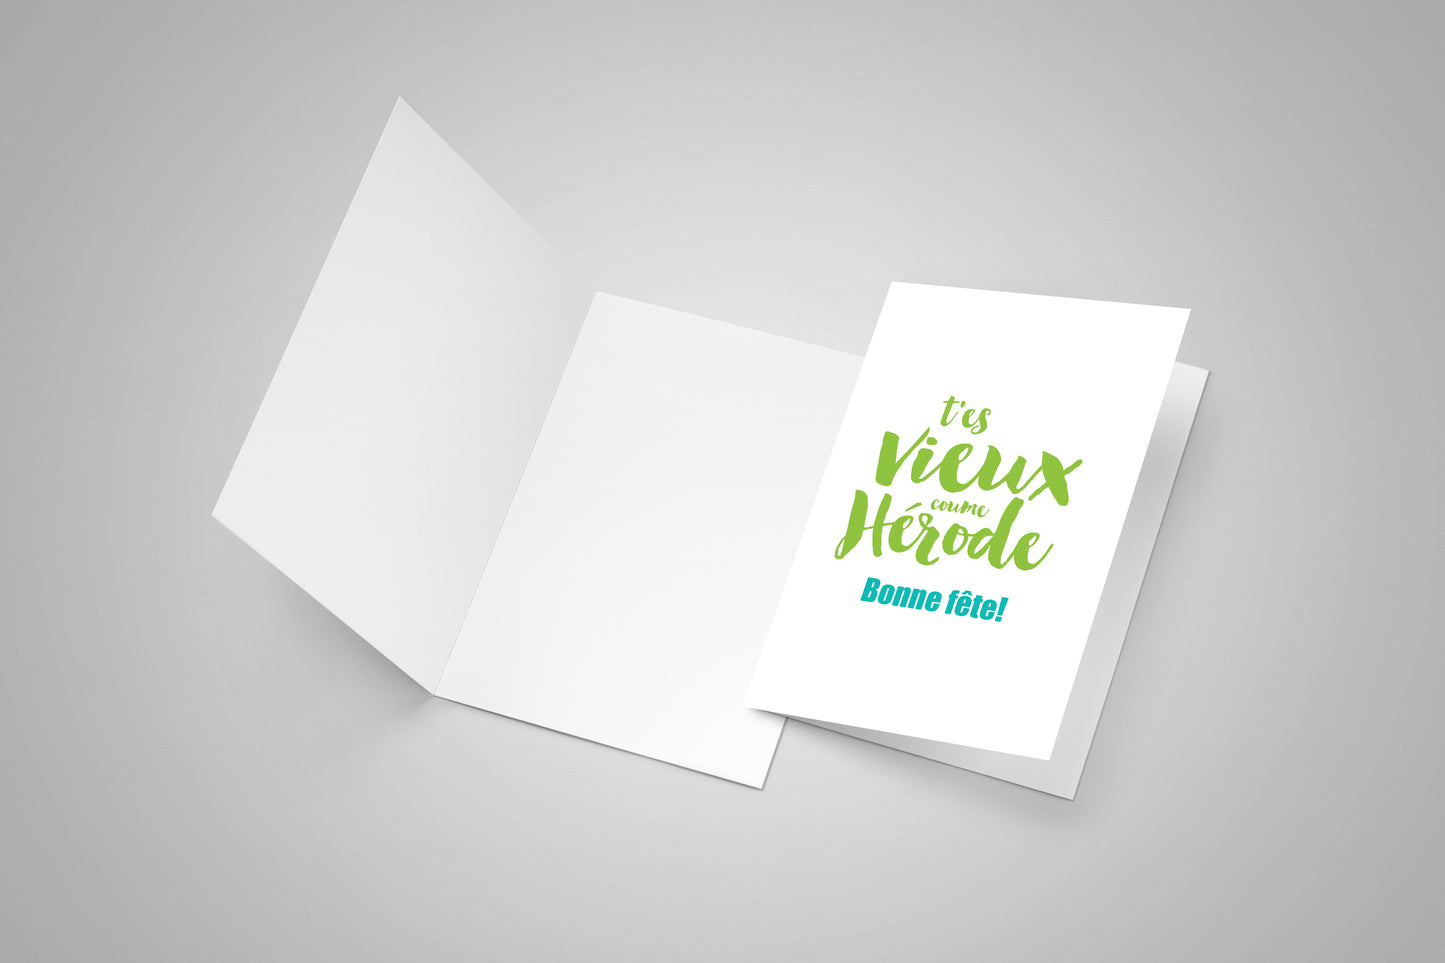 A blank greeting card and a second card with Acadian french saying.